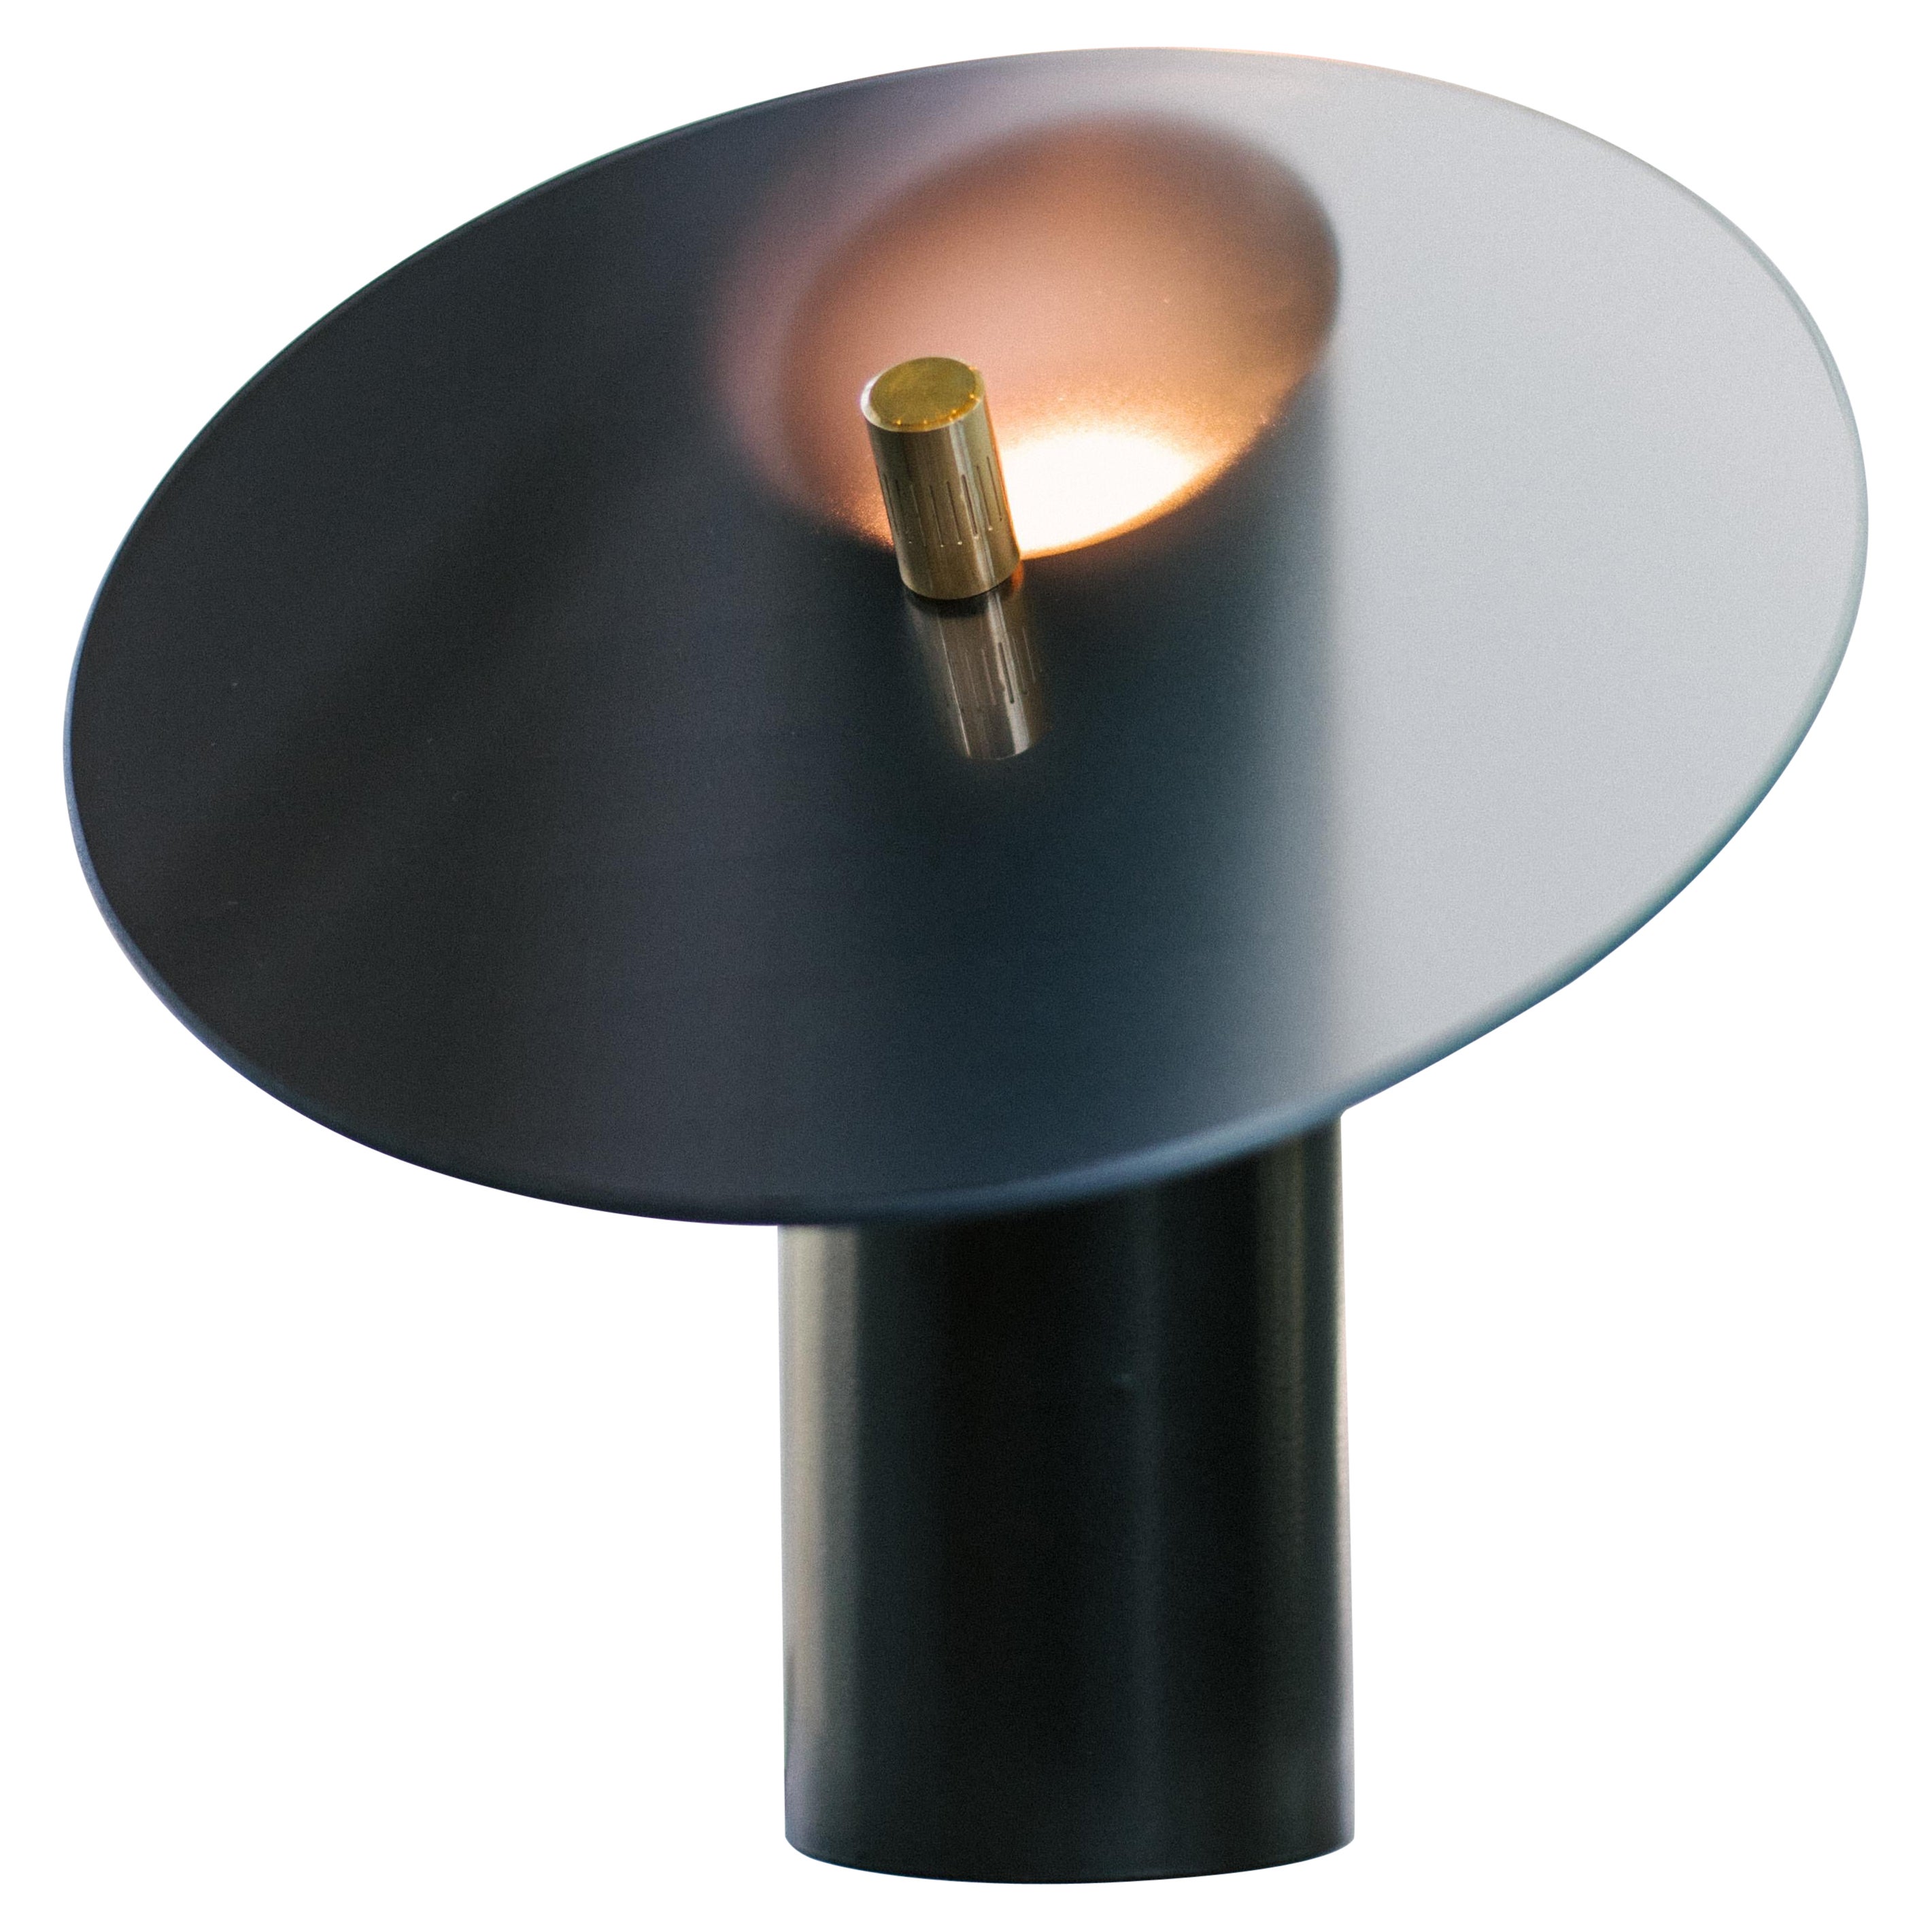 Contemporary Dimming Tinge Table Lamp by Astraeus Clarke Made in Brooklyn, Ny